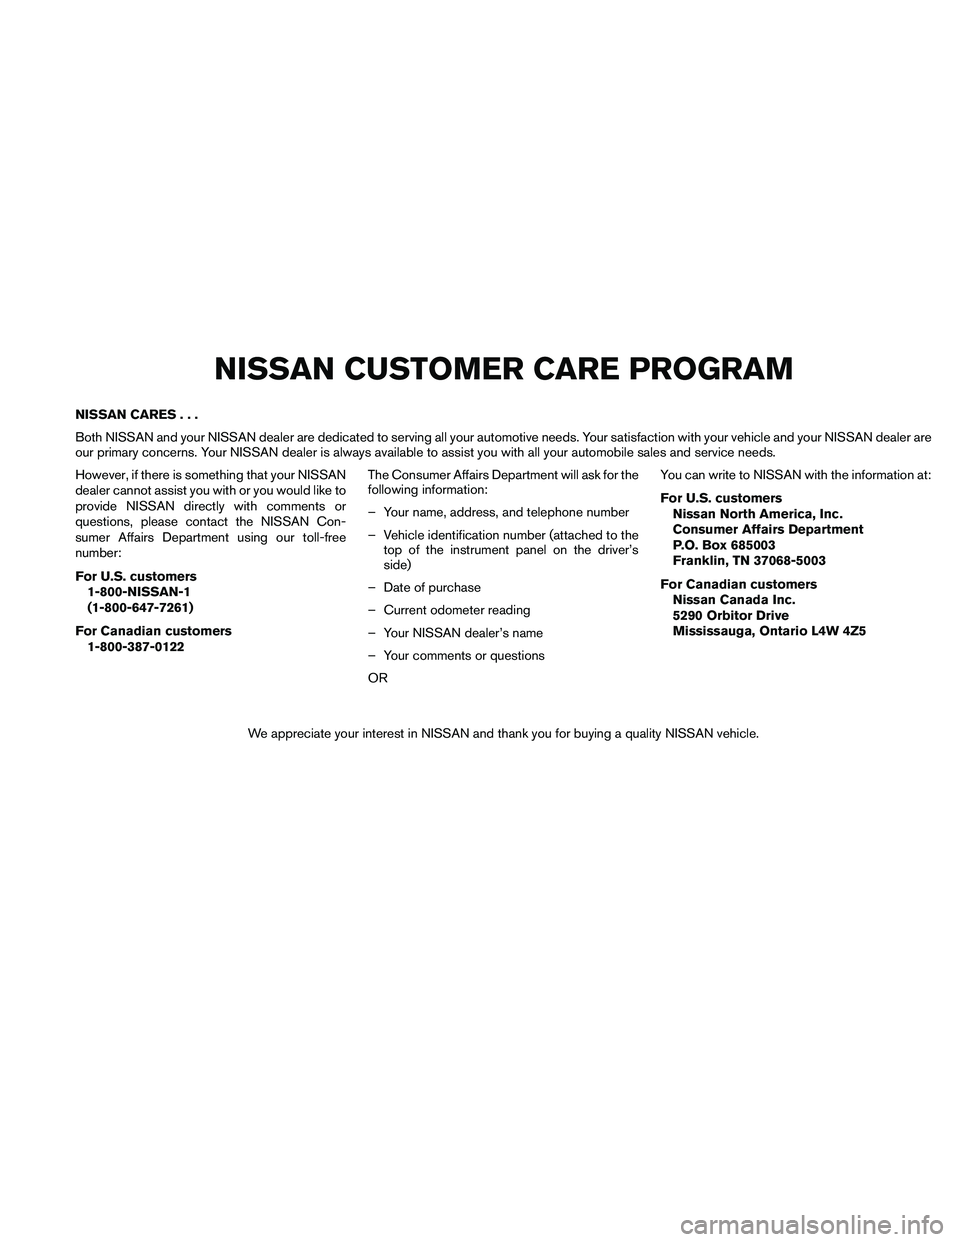 NISSAN MAXIMA 2010  Owner´s Manual NISSAN CARES...
Both NISSAN and your NISSAN dealer are dedicated to serving all your automotive needs. Your satisfaction with your vehicle and your NISSAN dealer are
our primary concerns. Your NISSAN 